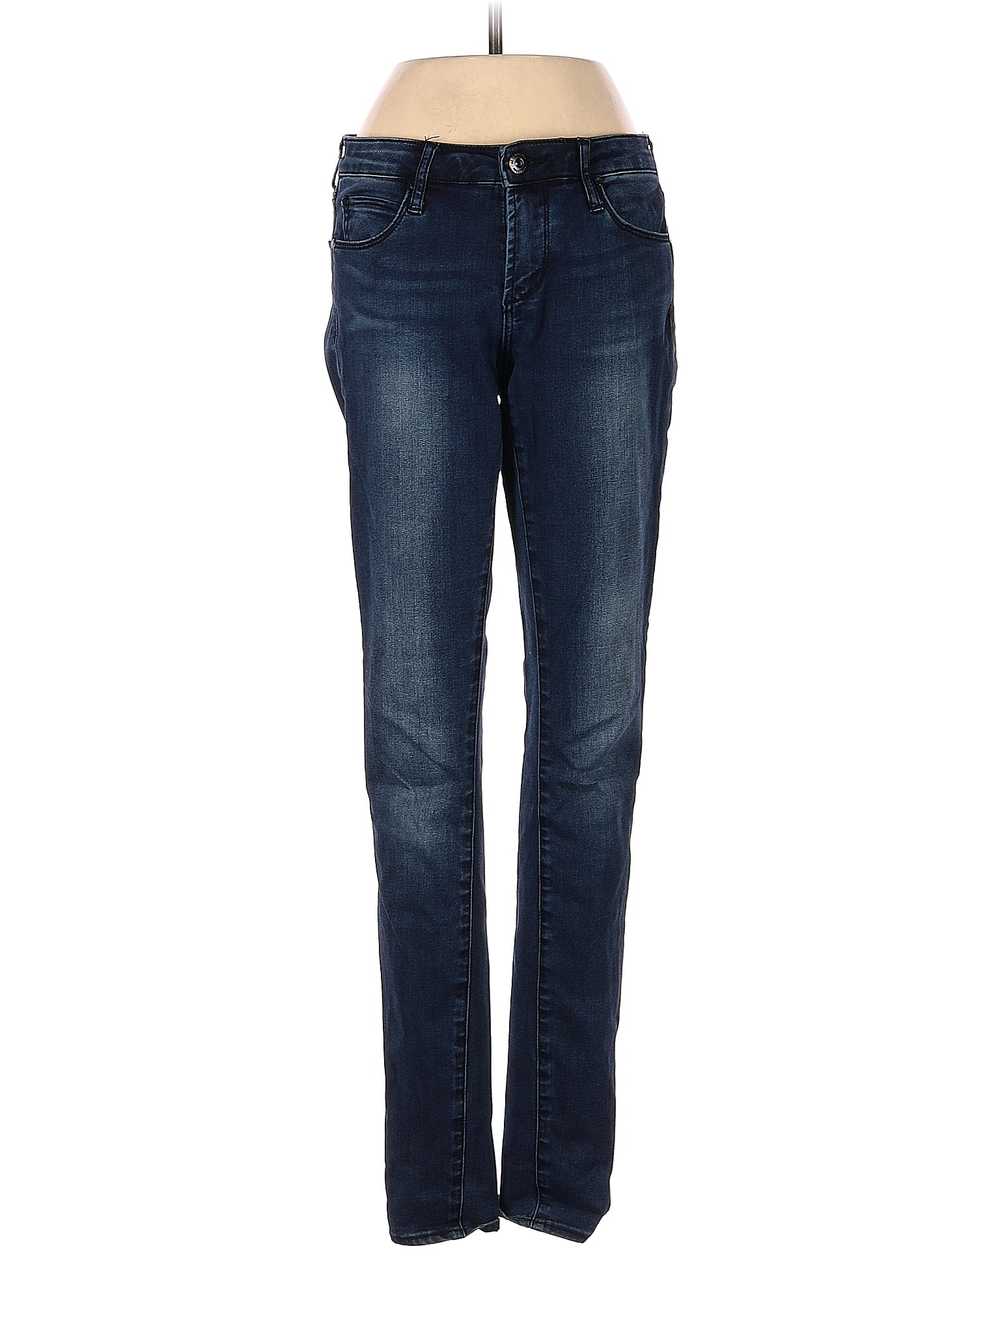 Articles of Society Women Blue Jeans 25W - image 1